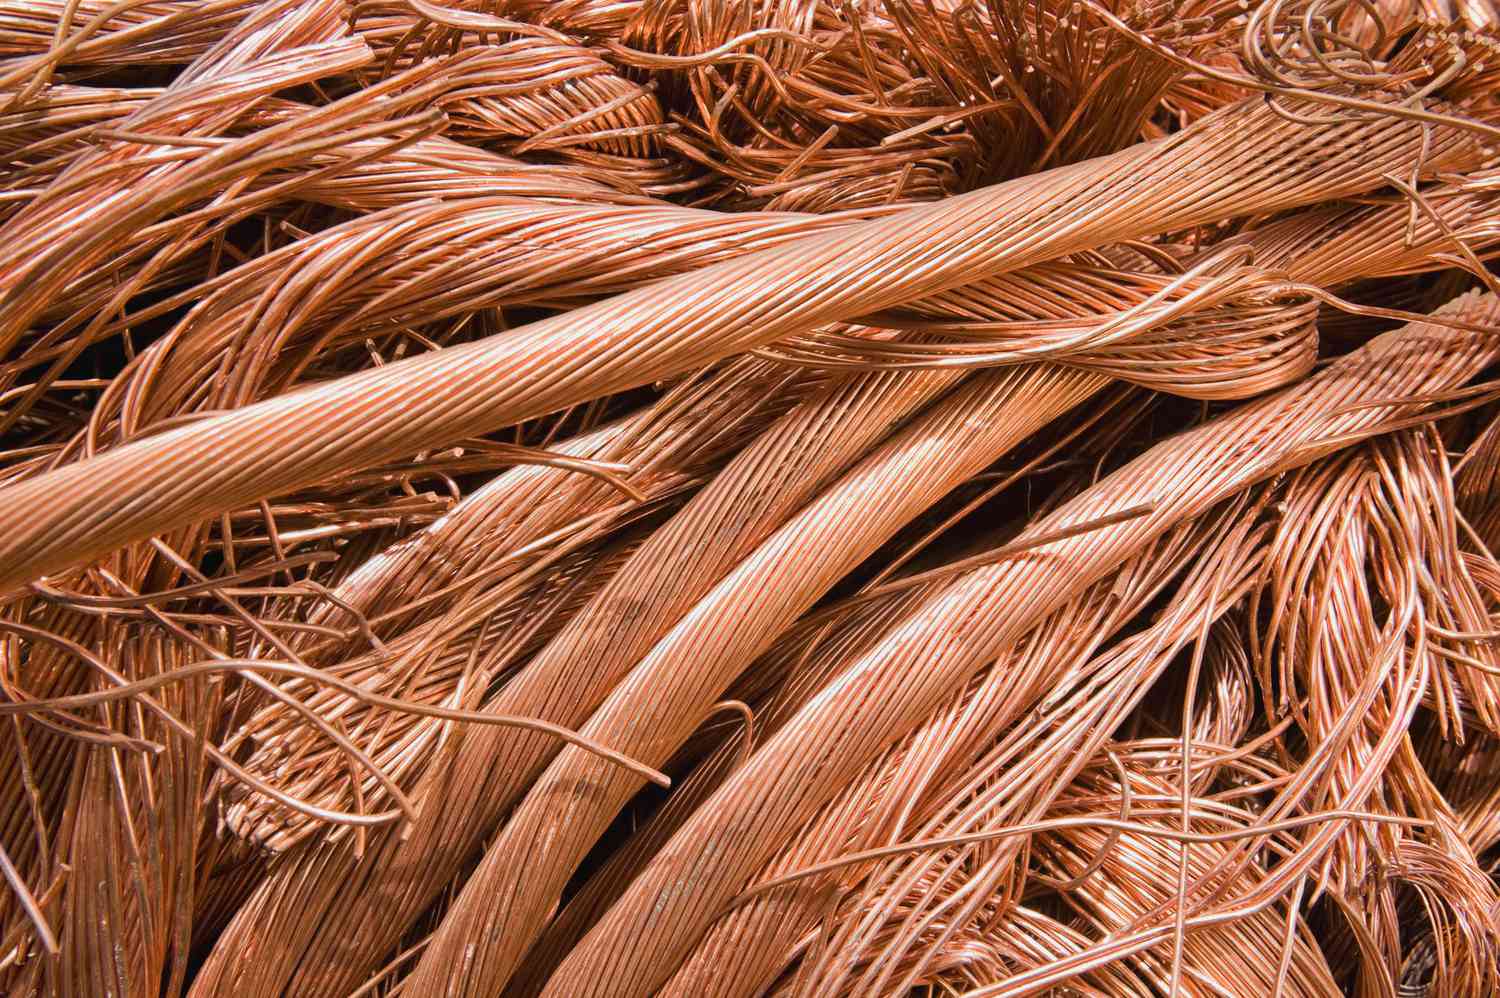 Kazakhstan increased copper output by 12.7% in 2022